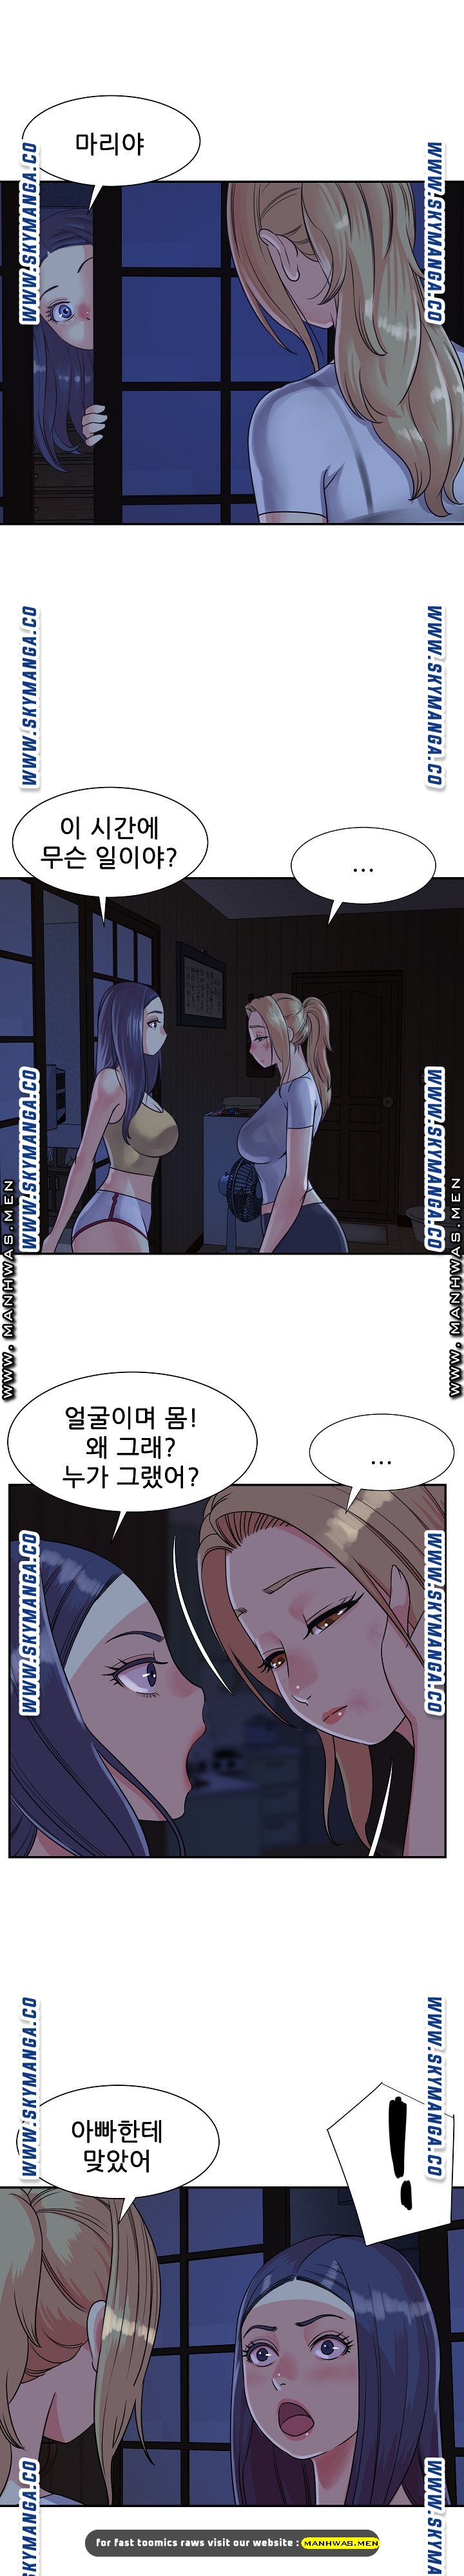 Two Sisters Raw - Chapter 11 Page 3